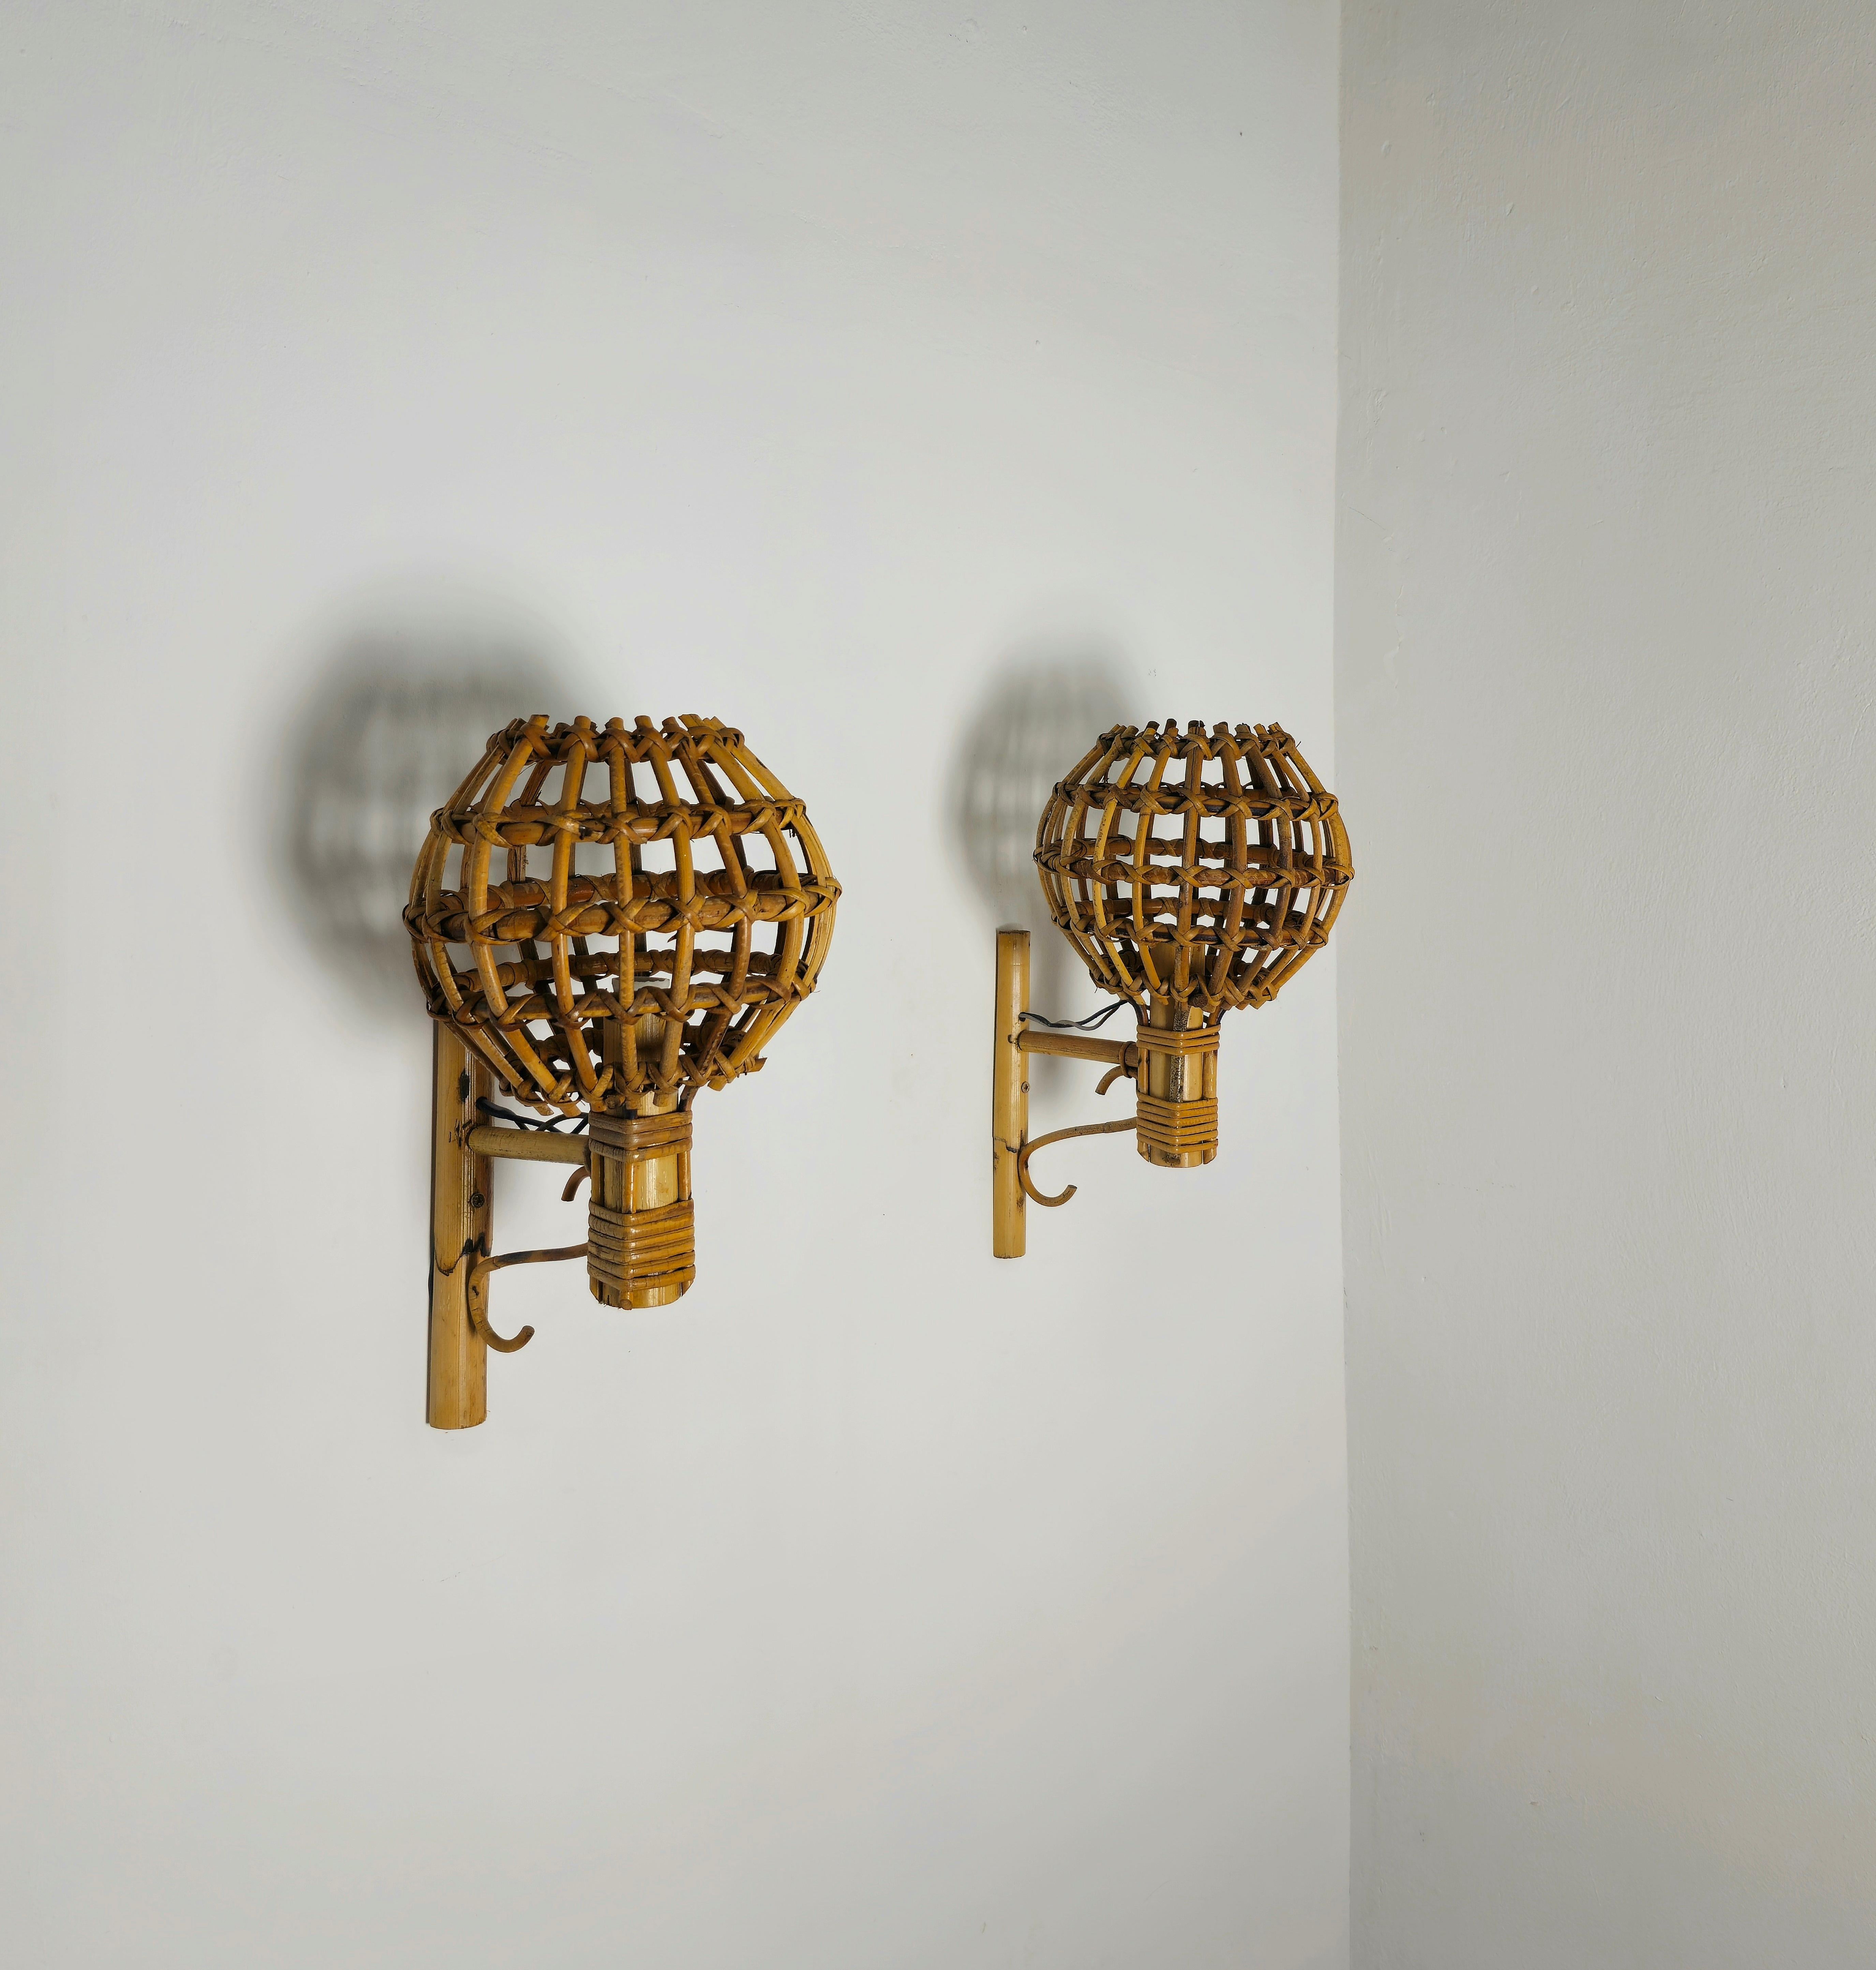 Italian Midcentury Wall Lights Rattan Bamboo Attributed to Louis Sognot 60s Set of 2 For Sale